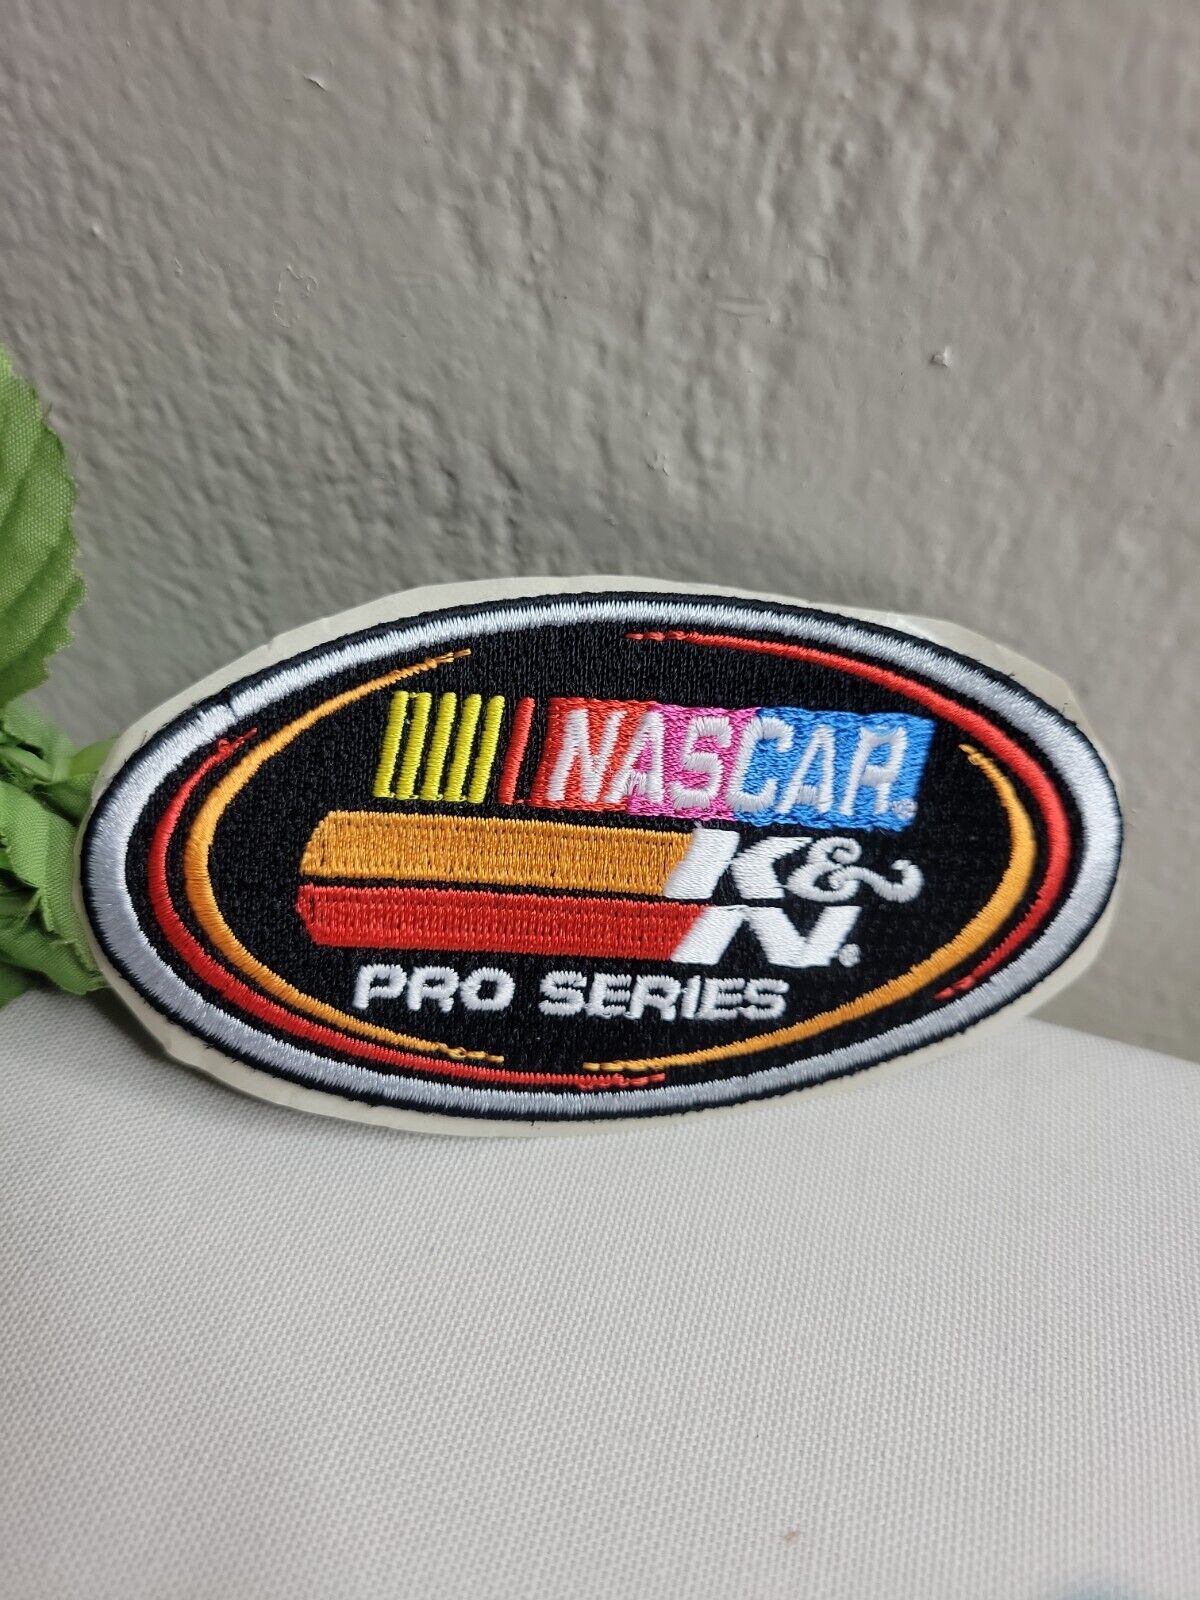 Nascar Racing K & N Pro Series Iron On Embroidered Jacket Uniform Patch